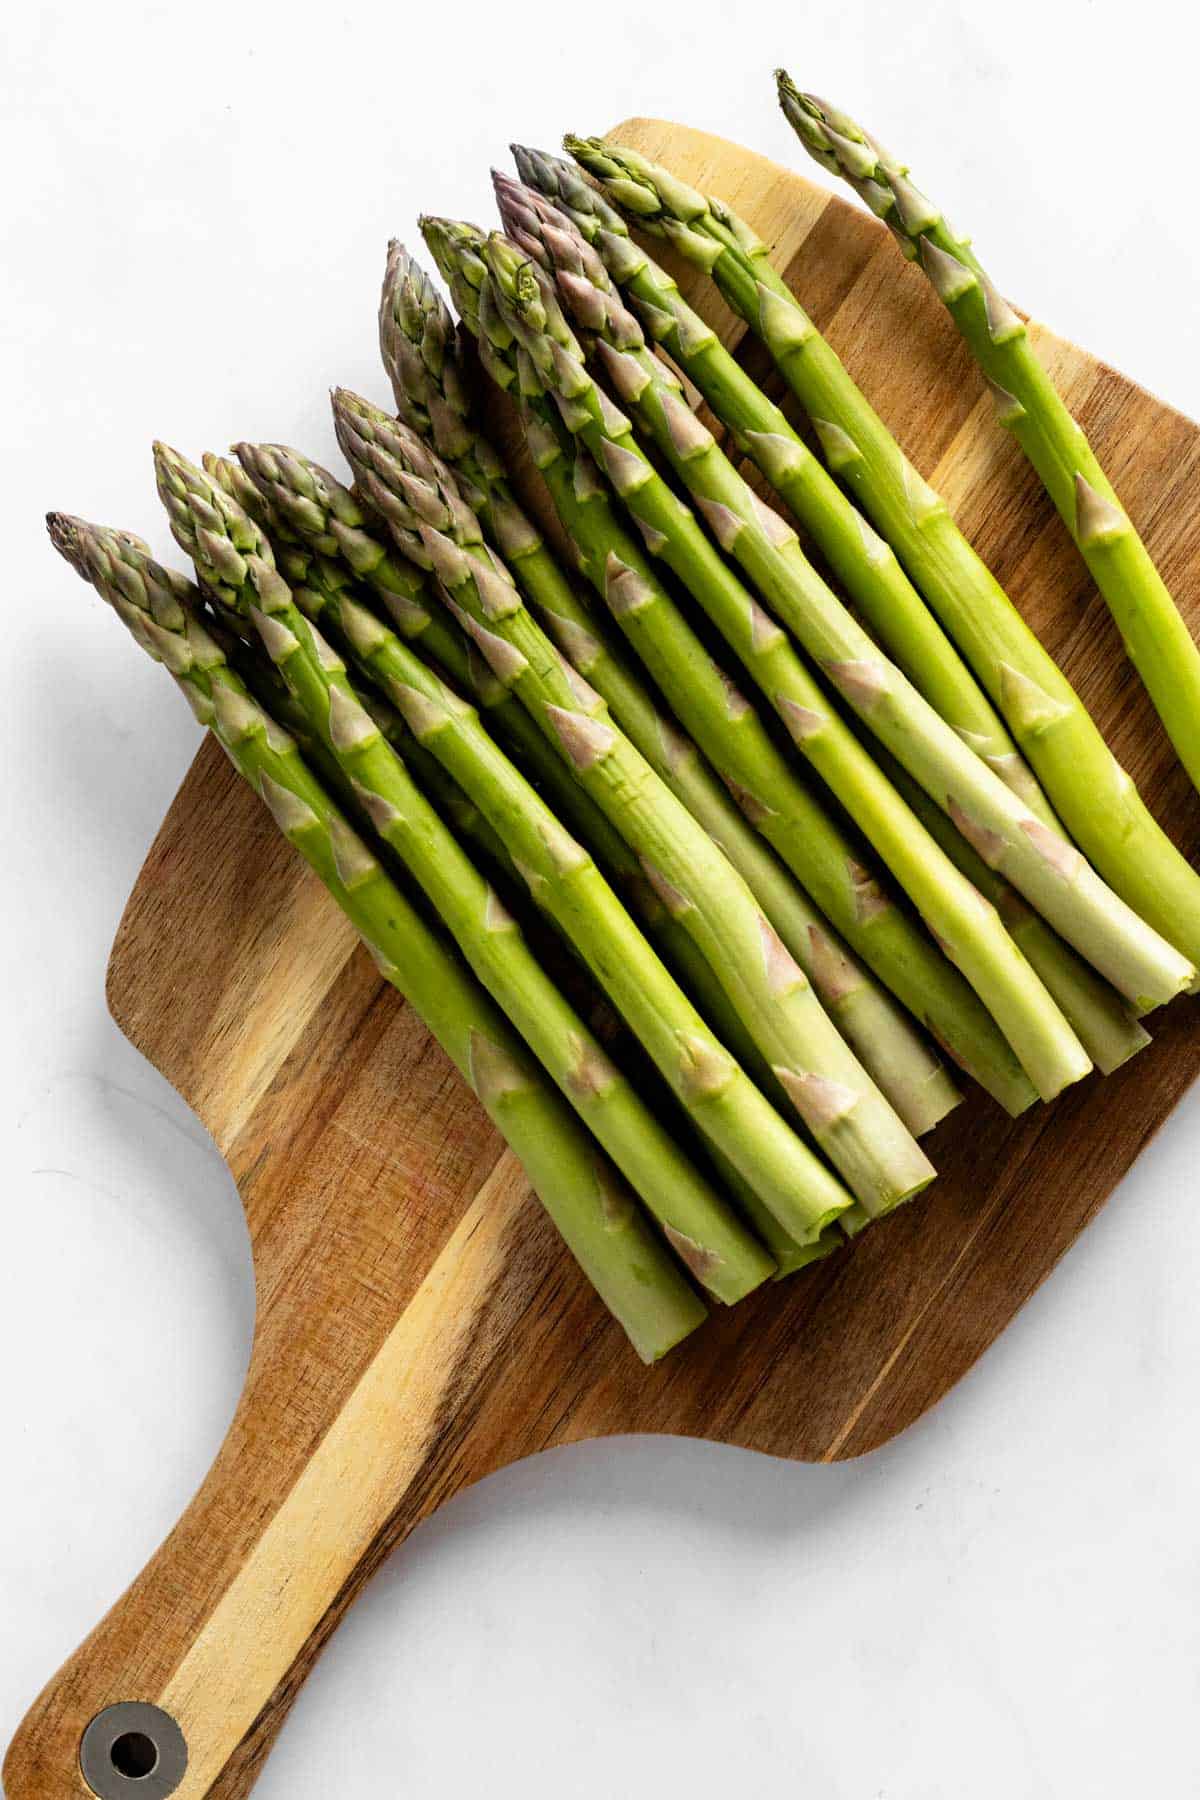 trimmed asparagus spears on a wooden cutting board.